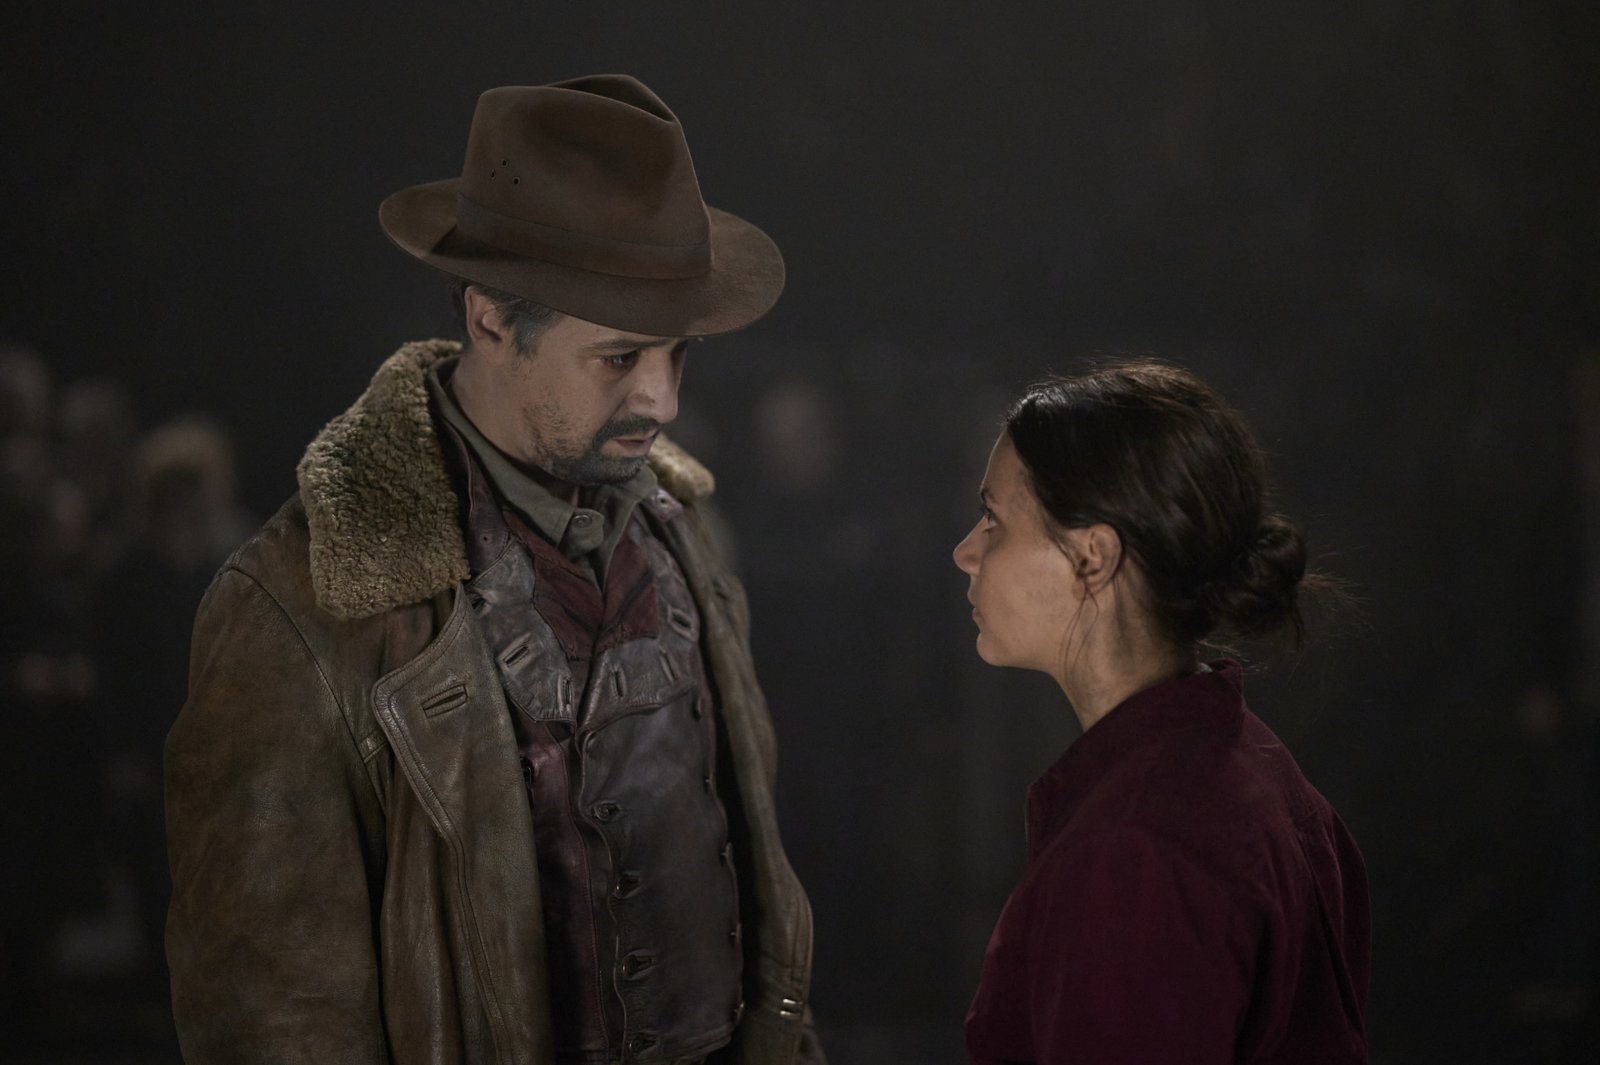 Lin-Manuel Miranda and Dafne Keen as Lee and Lyra in 'His Dark Materials' for our article about season 3, episodes 5 and 6. Lee is wearing a hat and looking down at Lyra, and she's staring up at him.